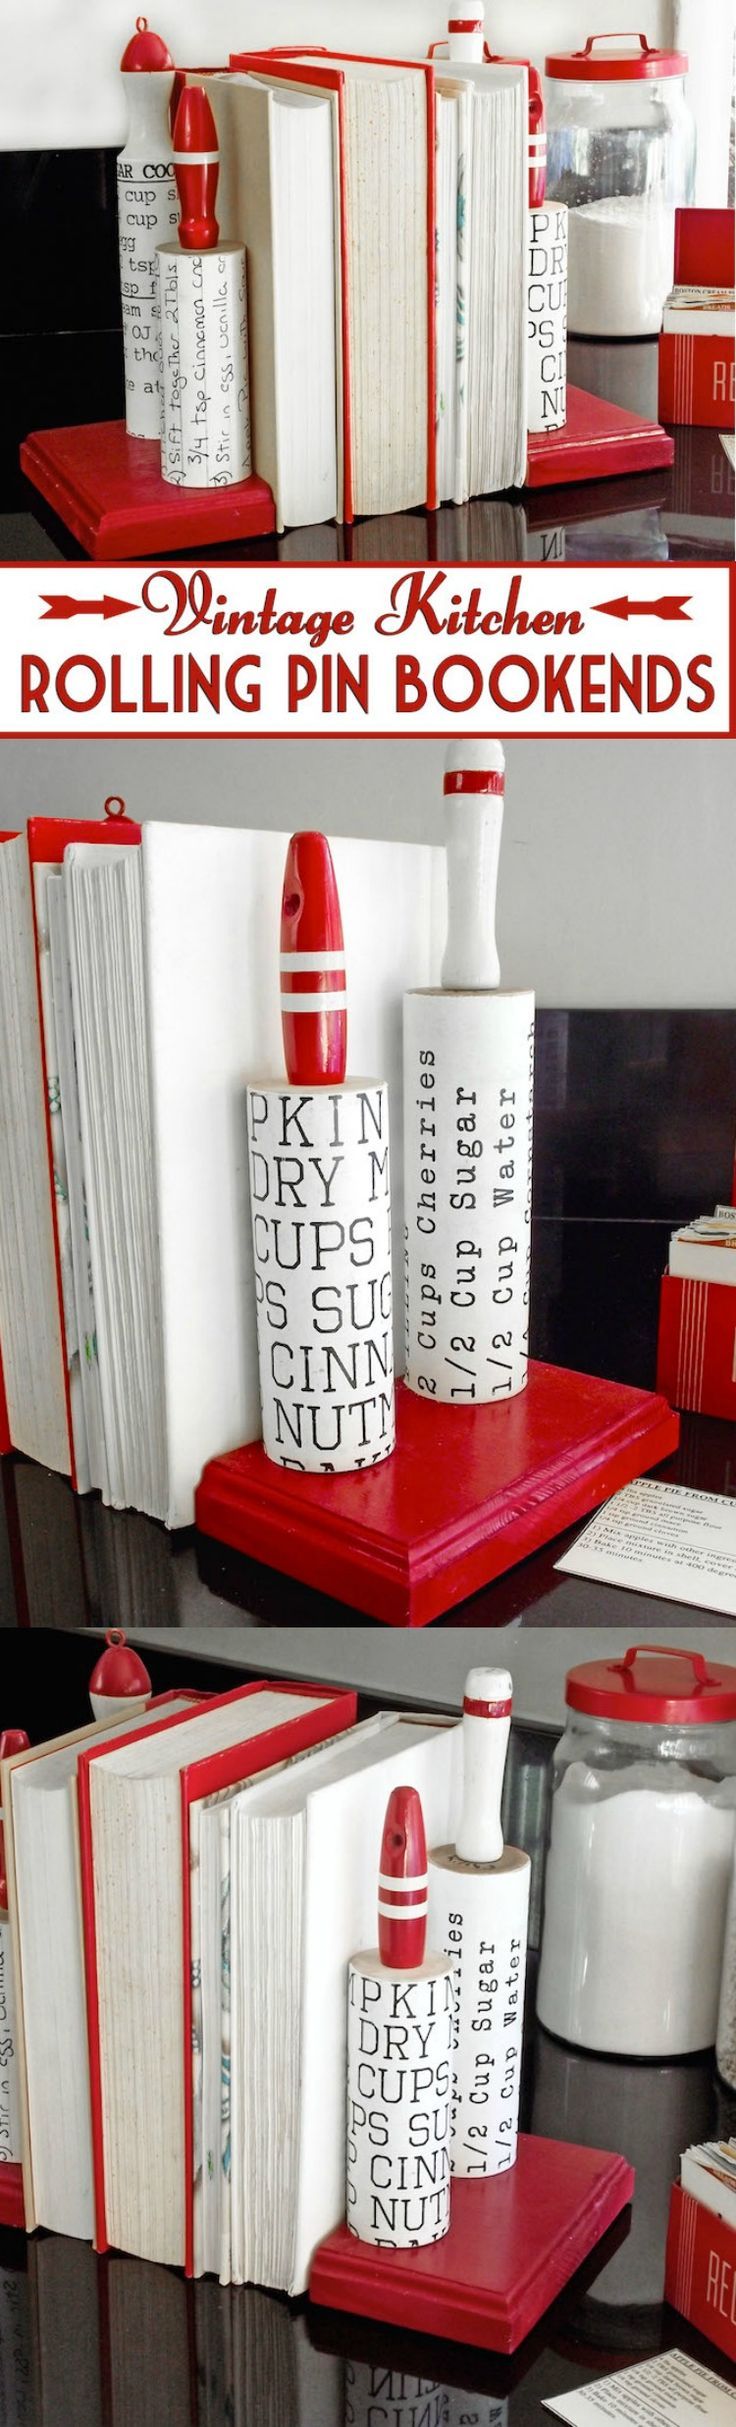 Use rolling pins to make vintage inspired bookends for your kitchen. Very easy p...